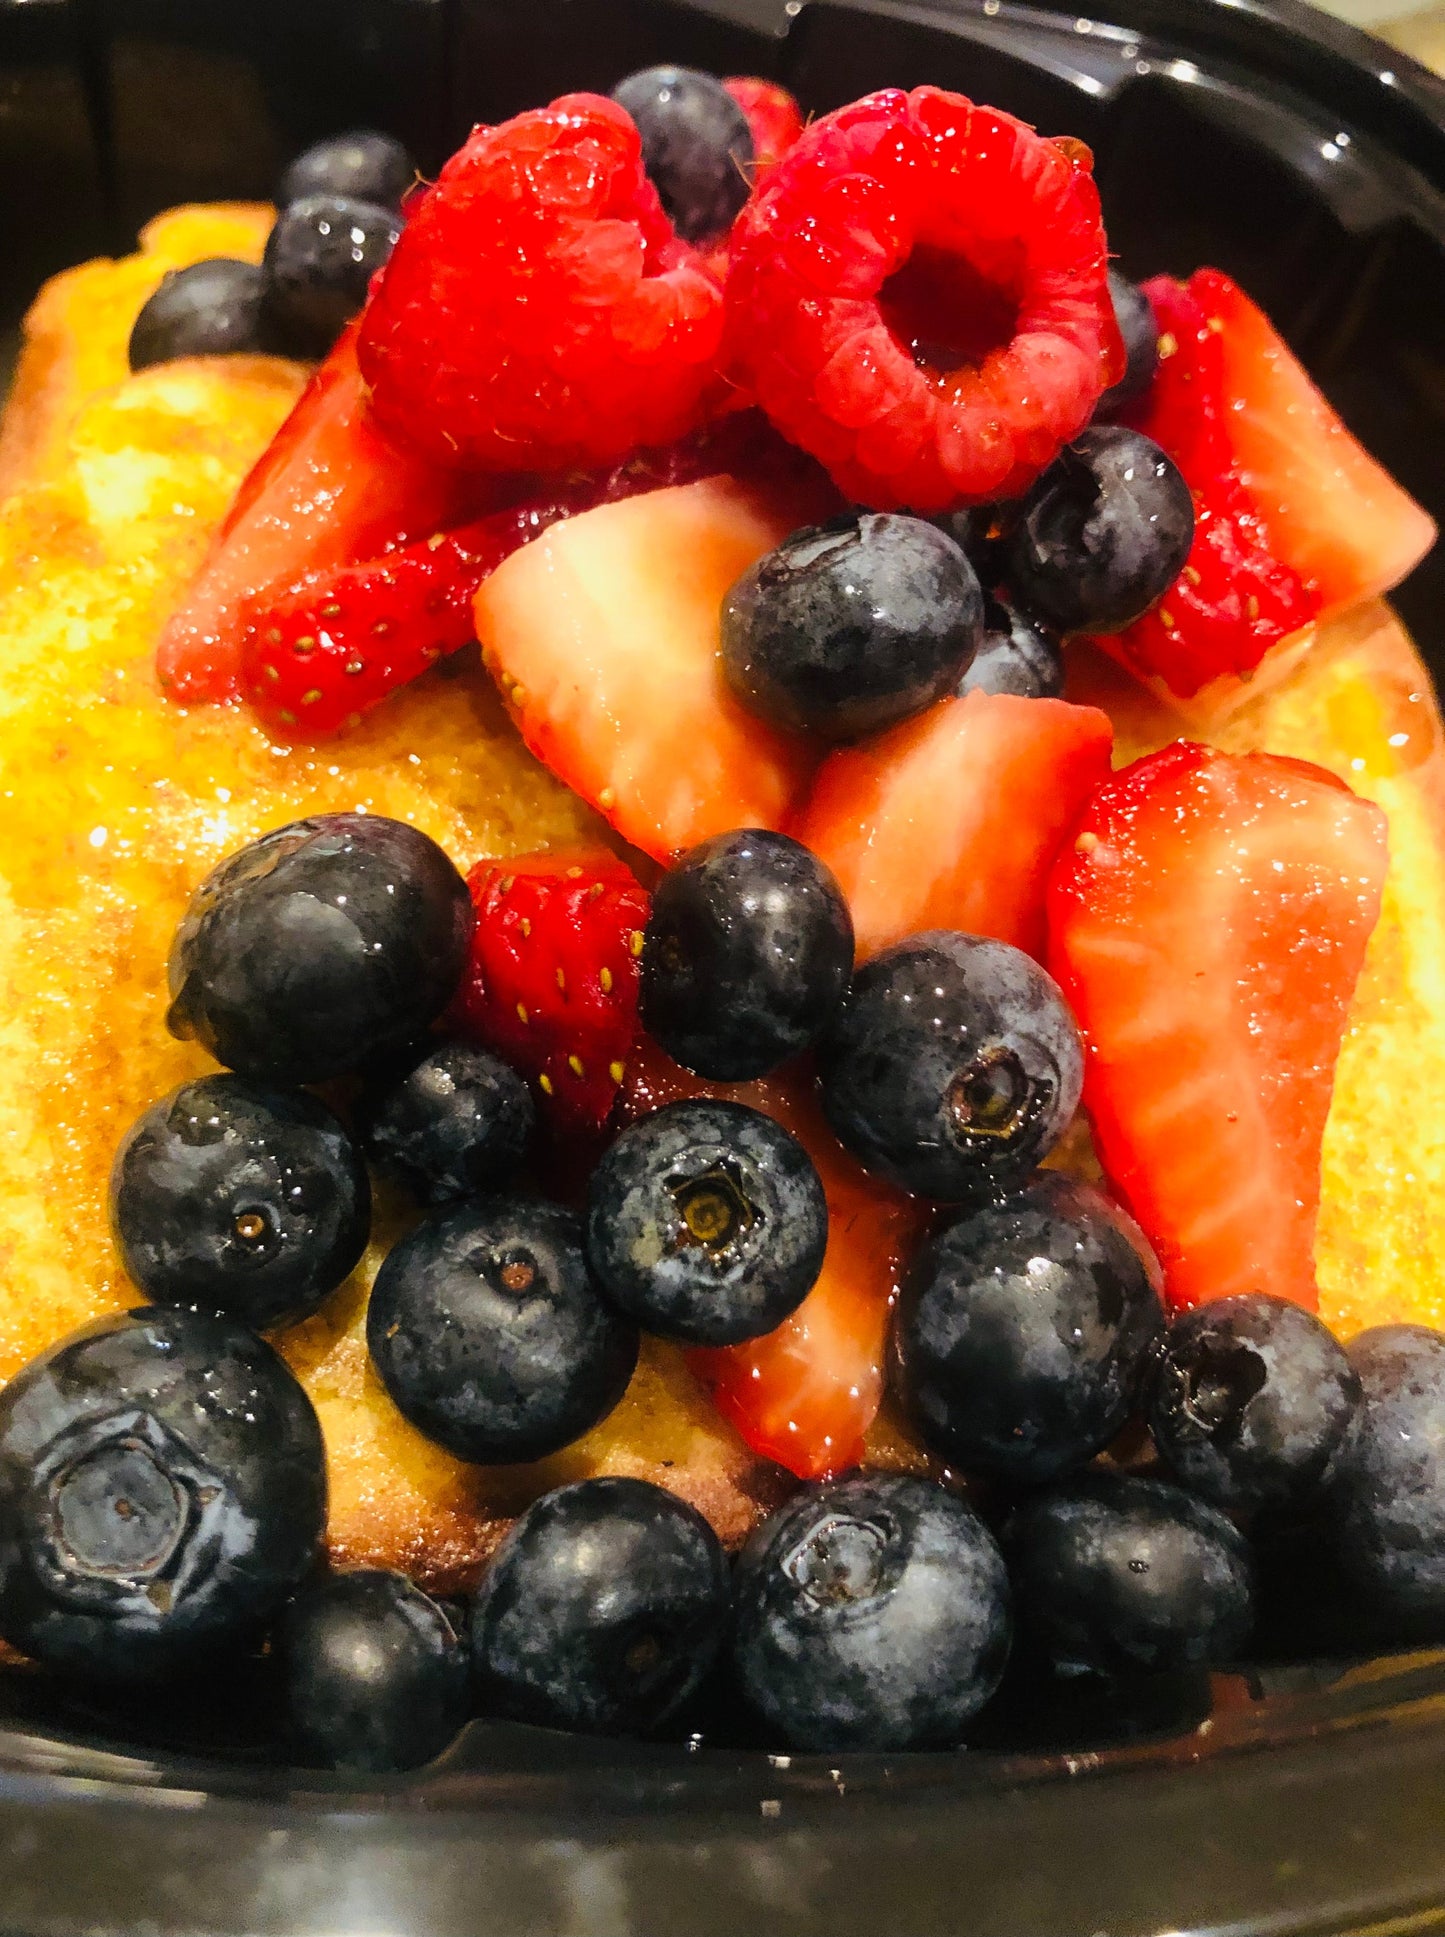 French Toast Topped w/ Fresh Mixed Berries + Sausage Patty